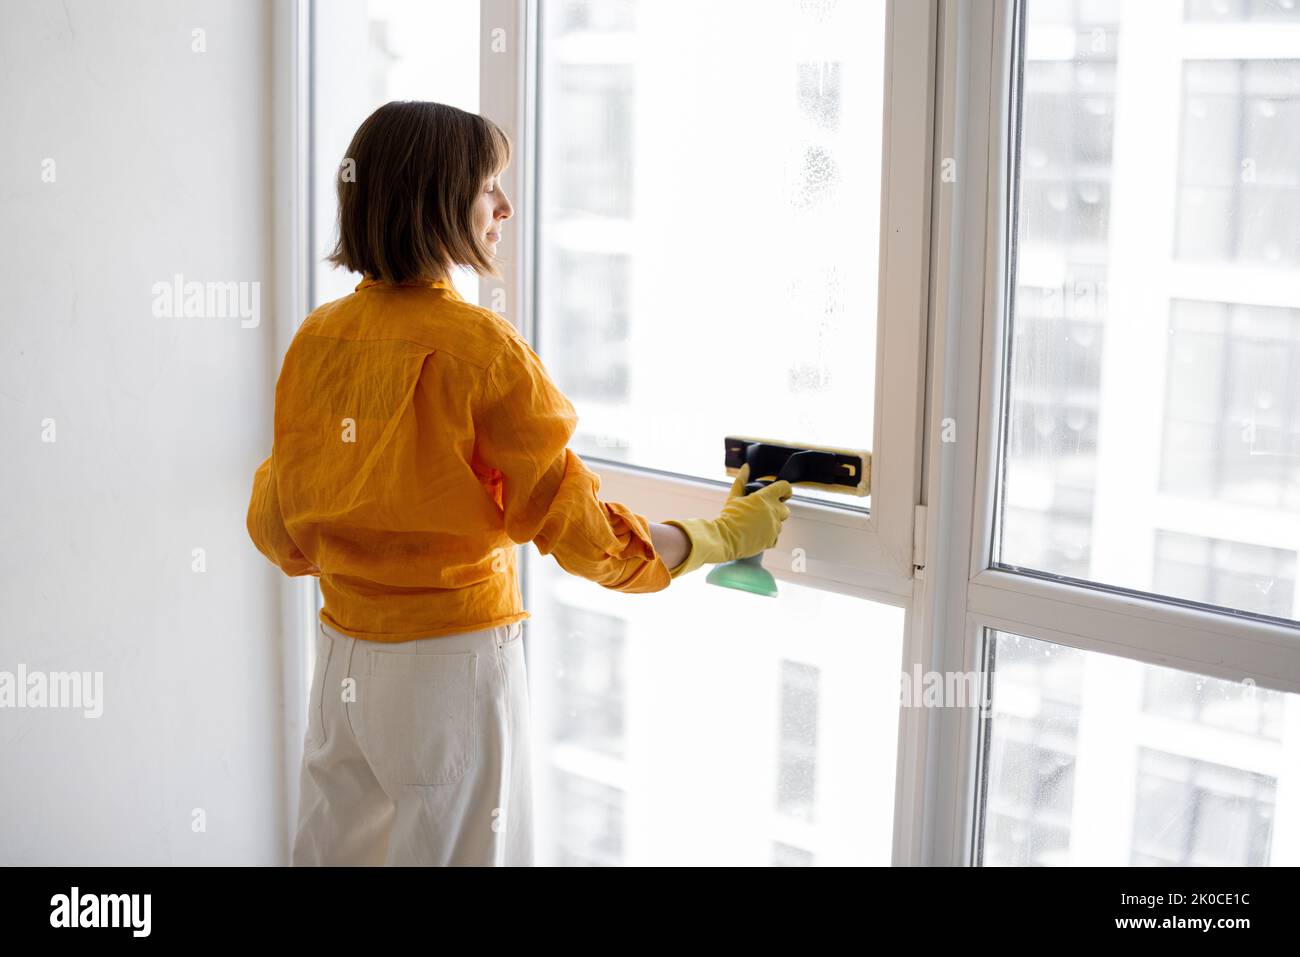 Young housewife or a cleaning company employee washes window with special tool in apartment. Stock Photo